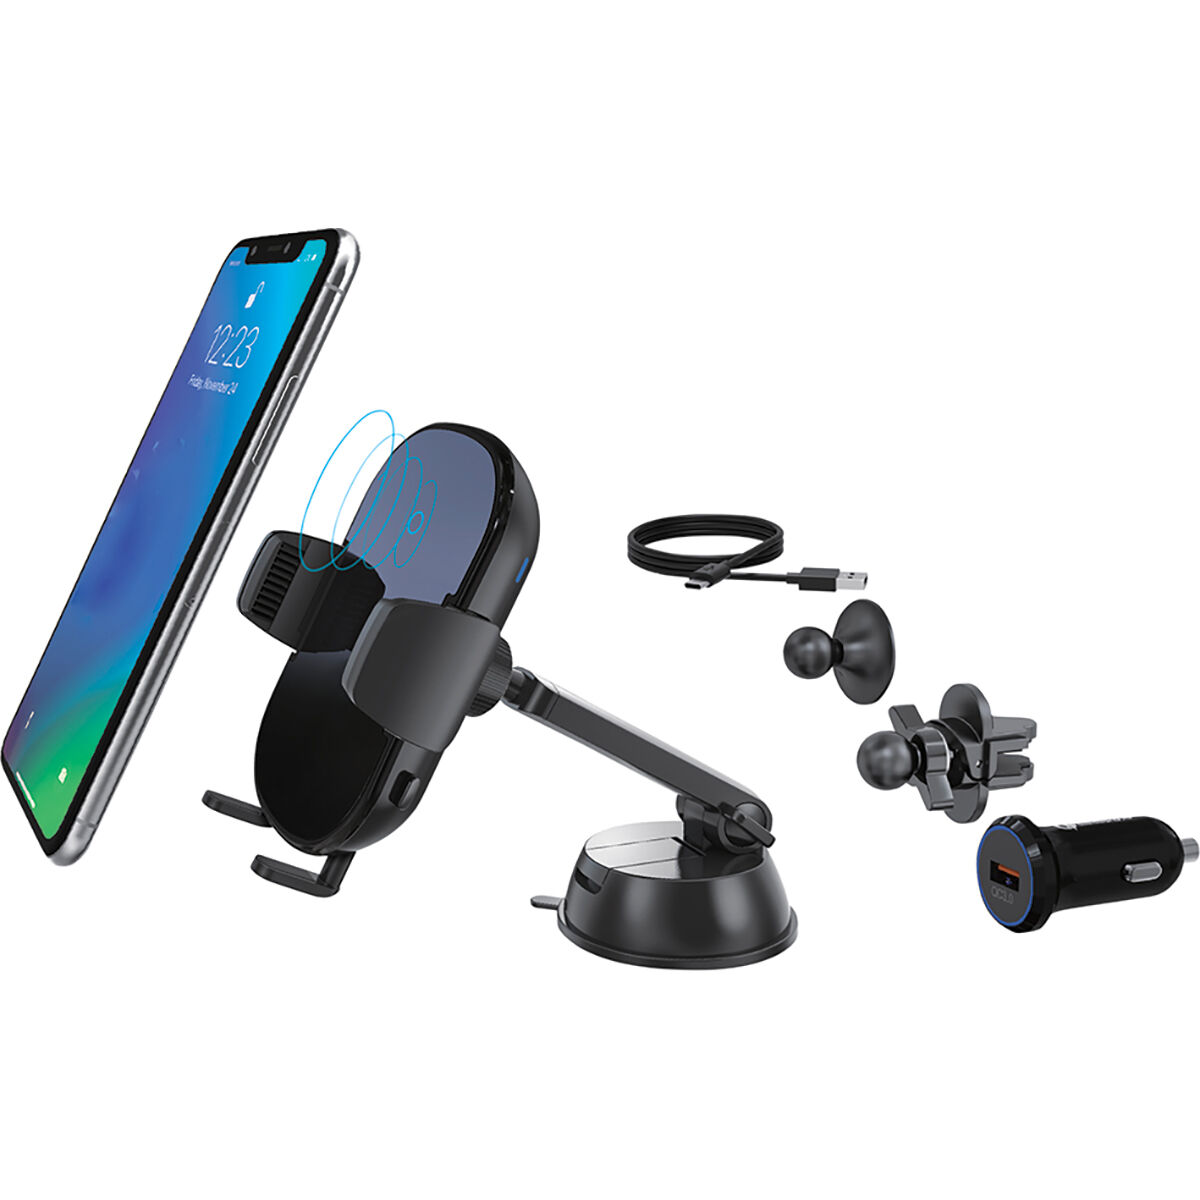 Magnetic Vehicle Mount Phone Holder Air Vent or Dashboard for iPhone 8 8 Plus EooCoo Qi Wireless Car Charger for Samsung Glaxy Note 8/S8/S8 Plus and All Qi-Enabled Devices X 